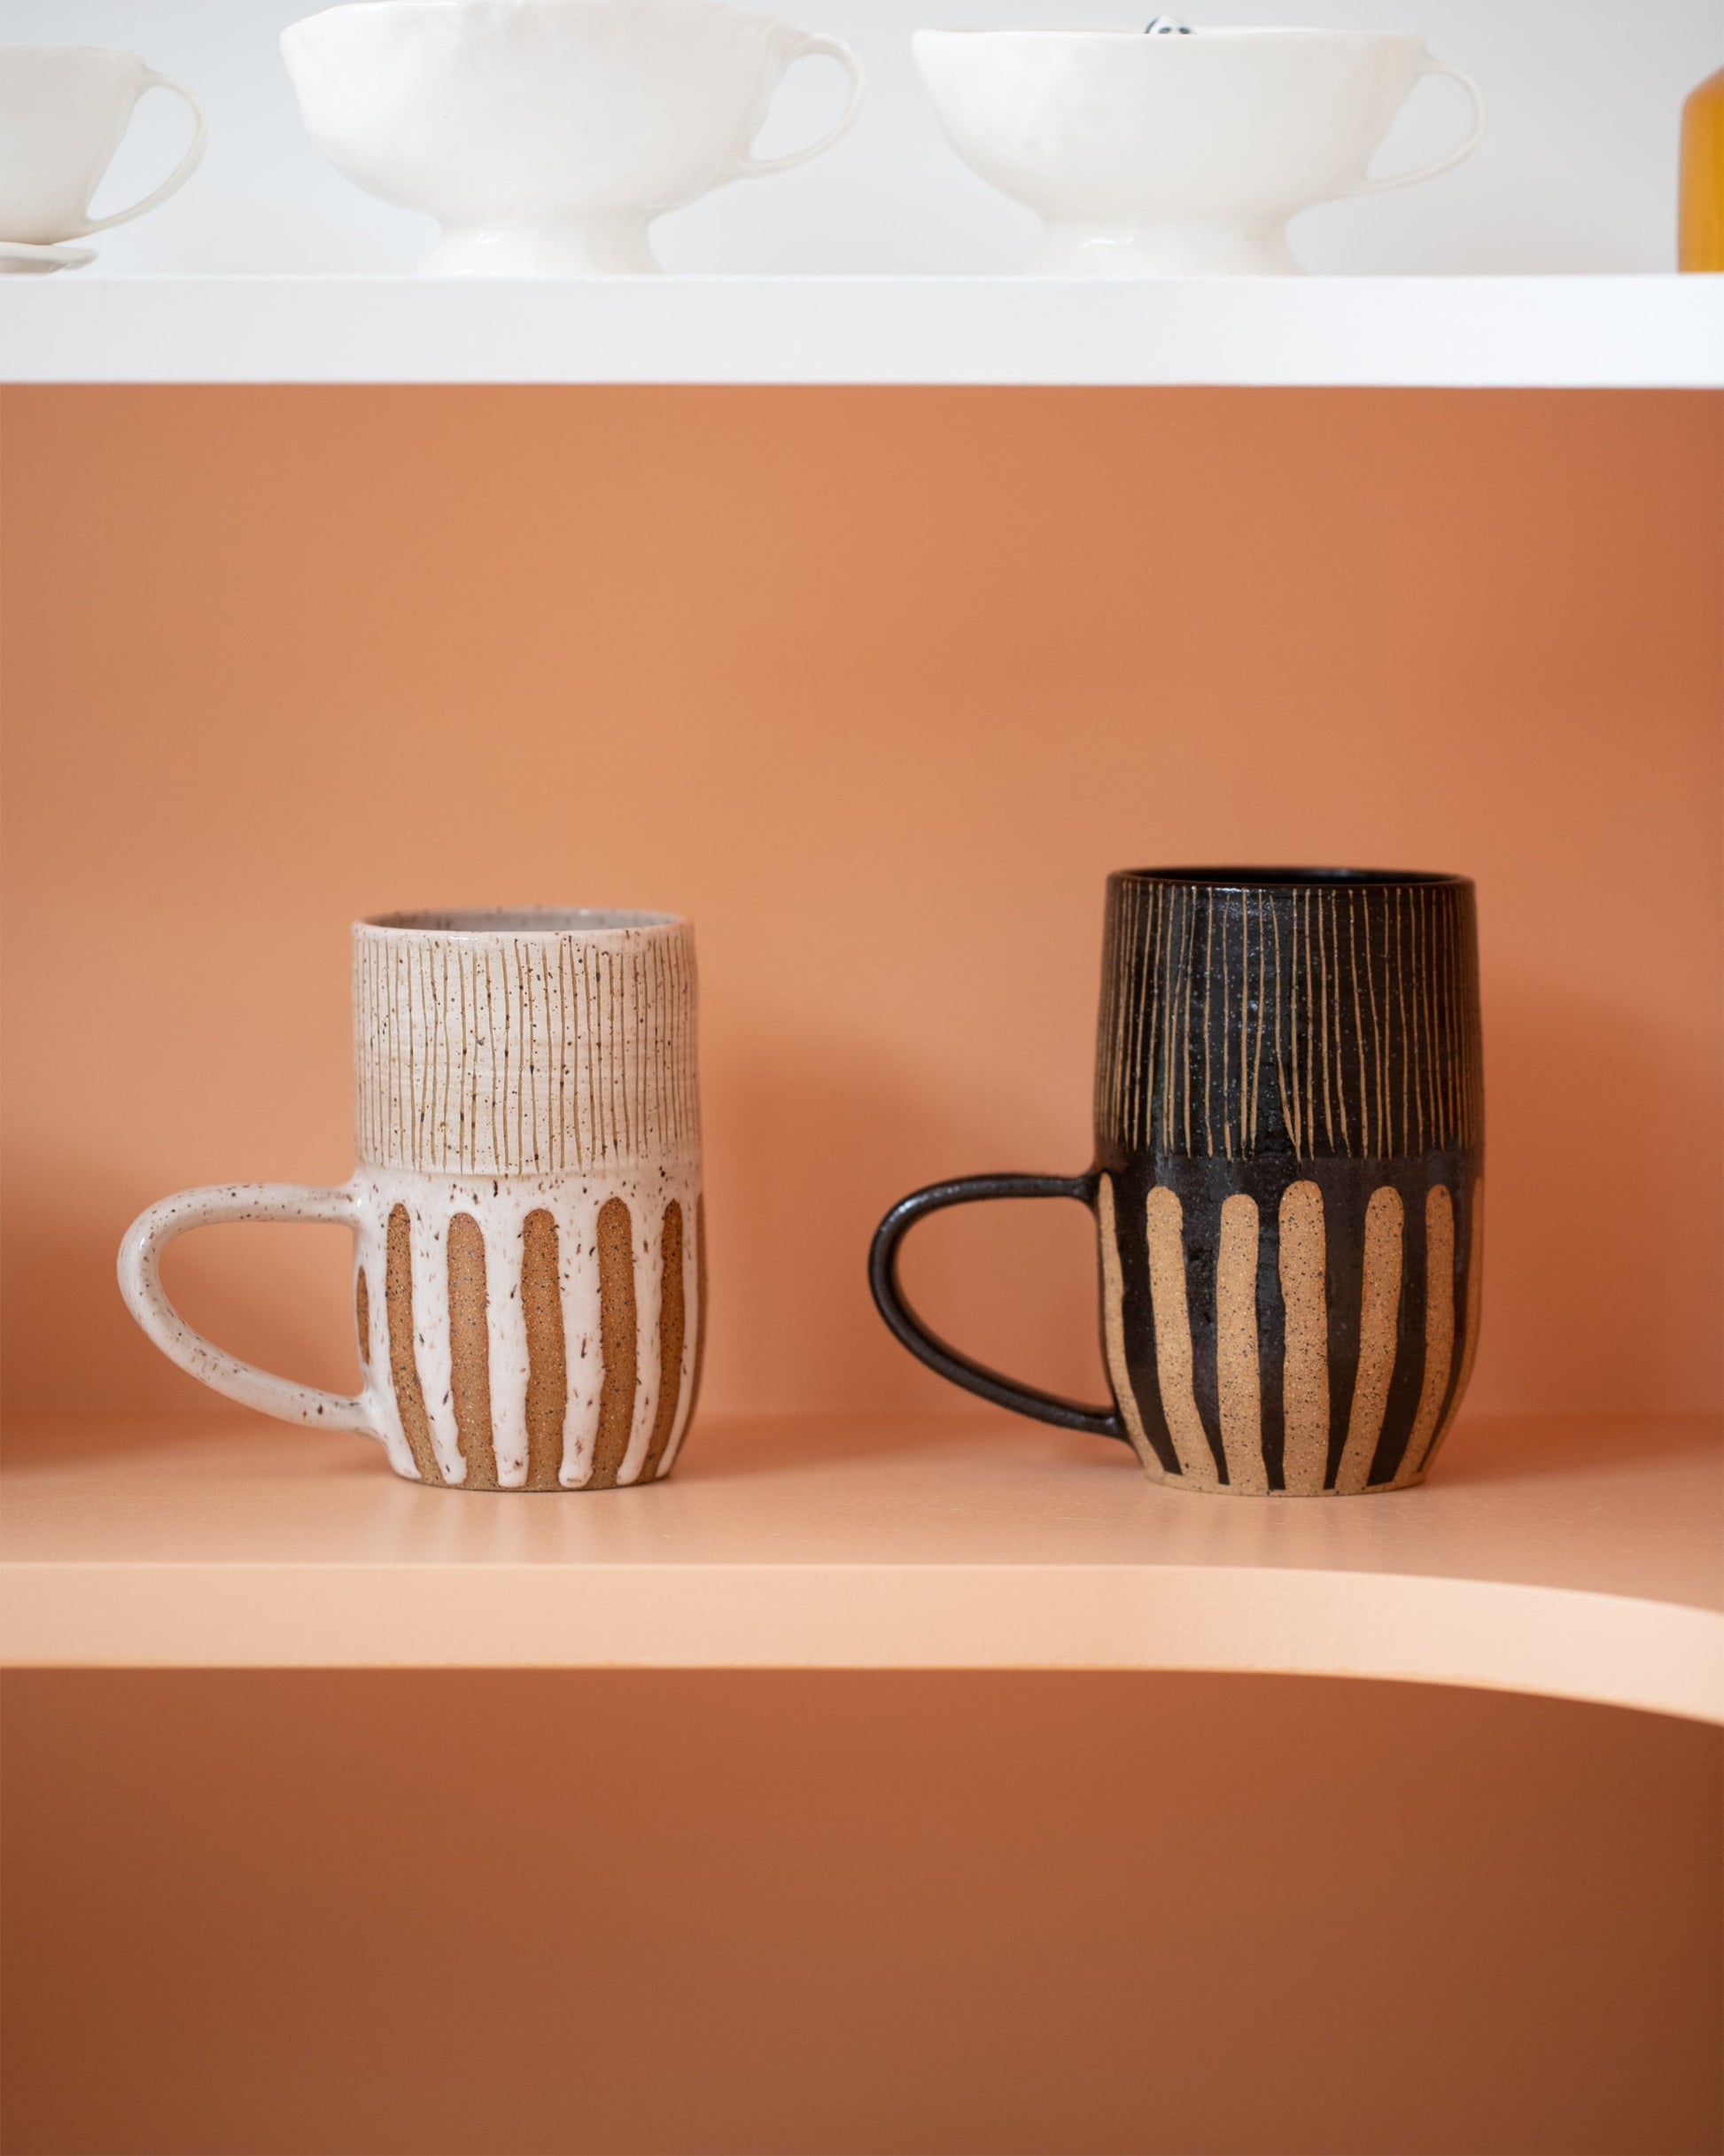 Styled group image of Little Bear Pots White Striped Mug and Little Bear Pots Black Striped Mug.